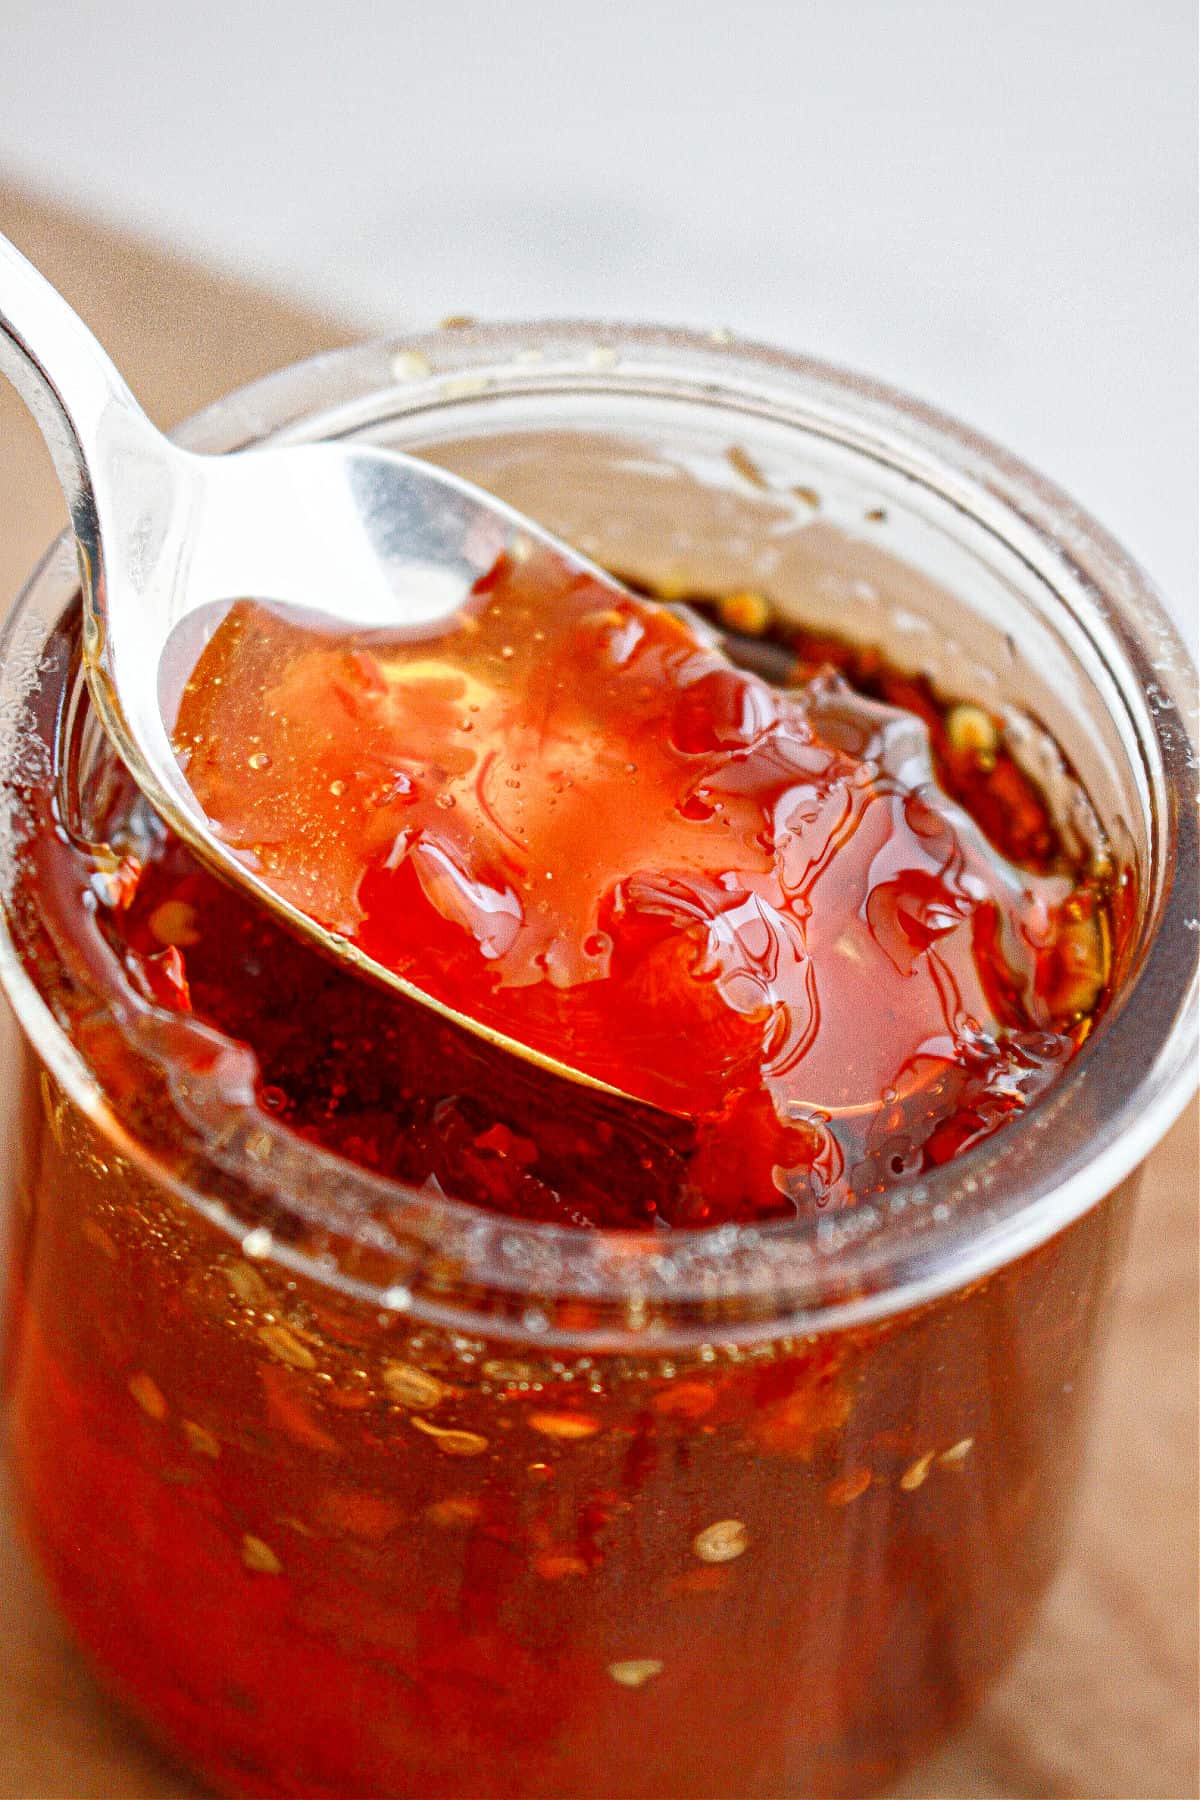 Jar with red chili jam being lifted with a spoon.